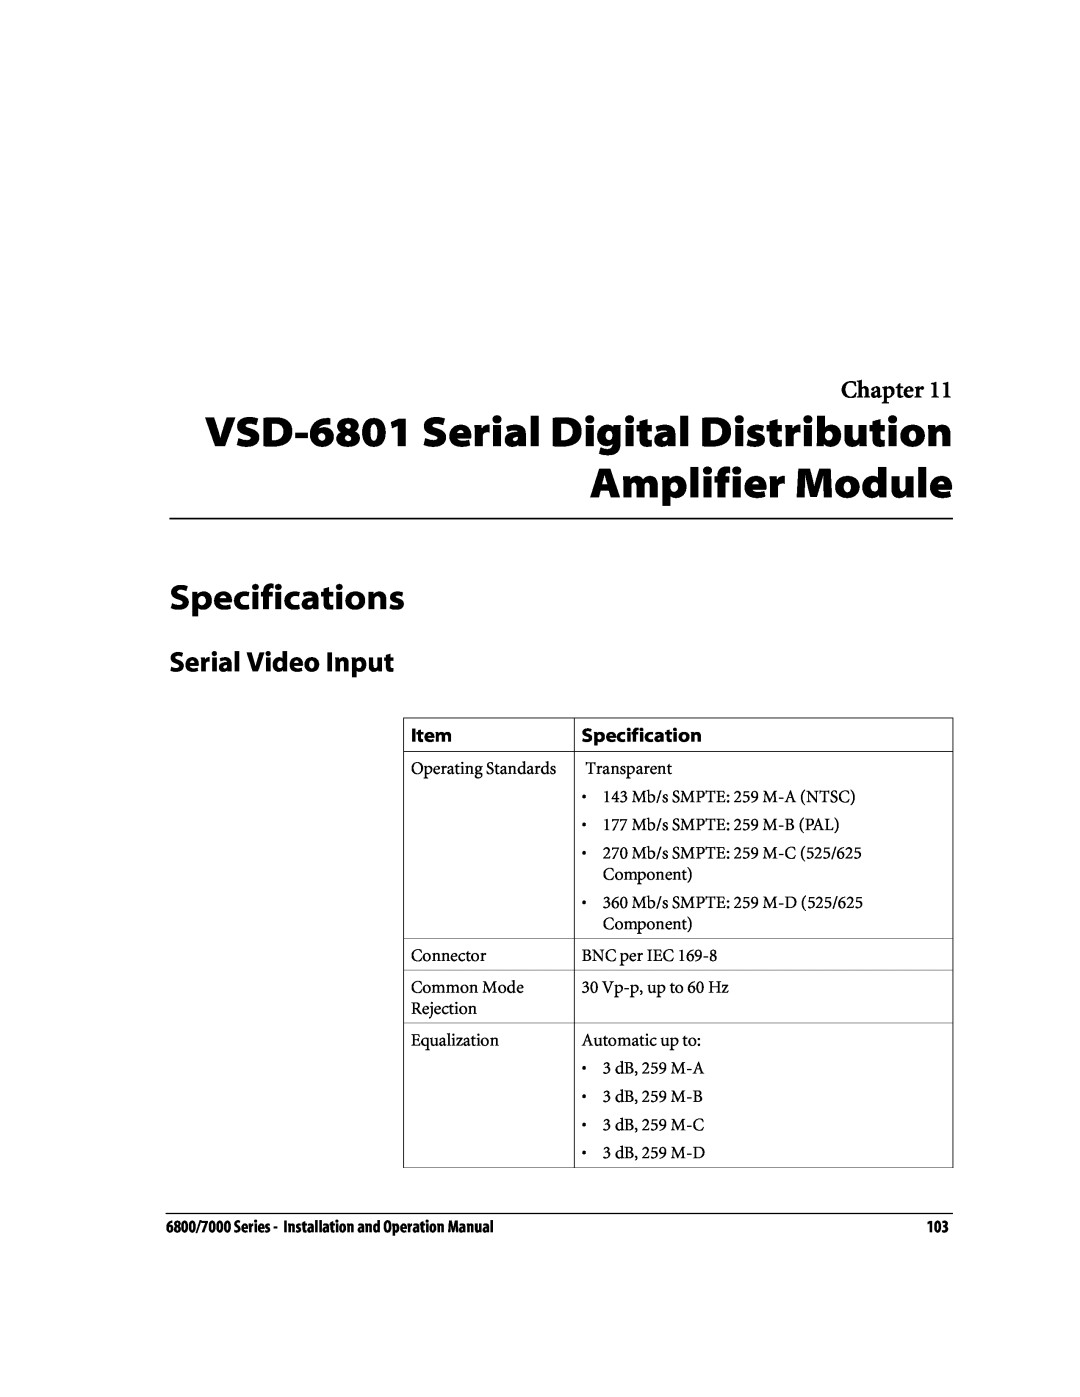 Nokia 6800 Series VSD-6801 Serial Digital Distribution Amplifier Module, Specifications, Serial Video Input, Chapter 